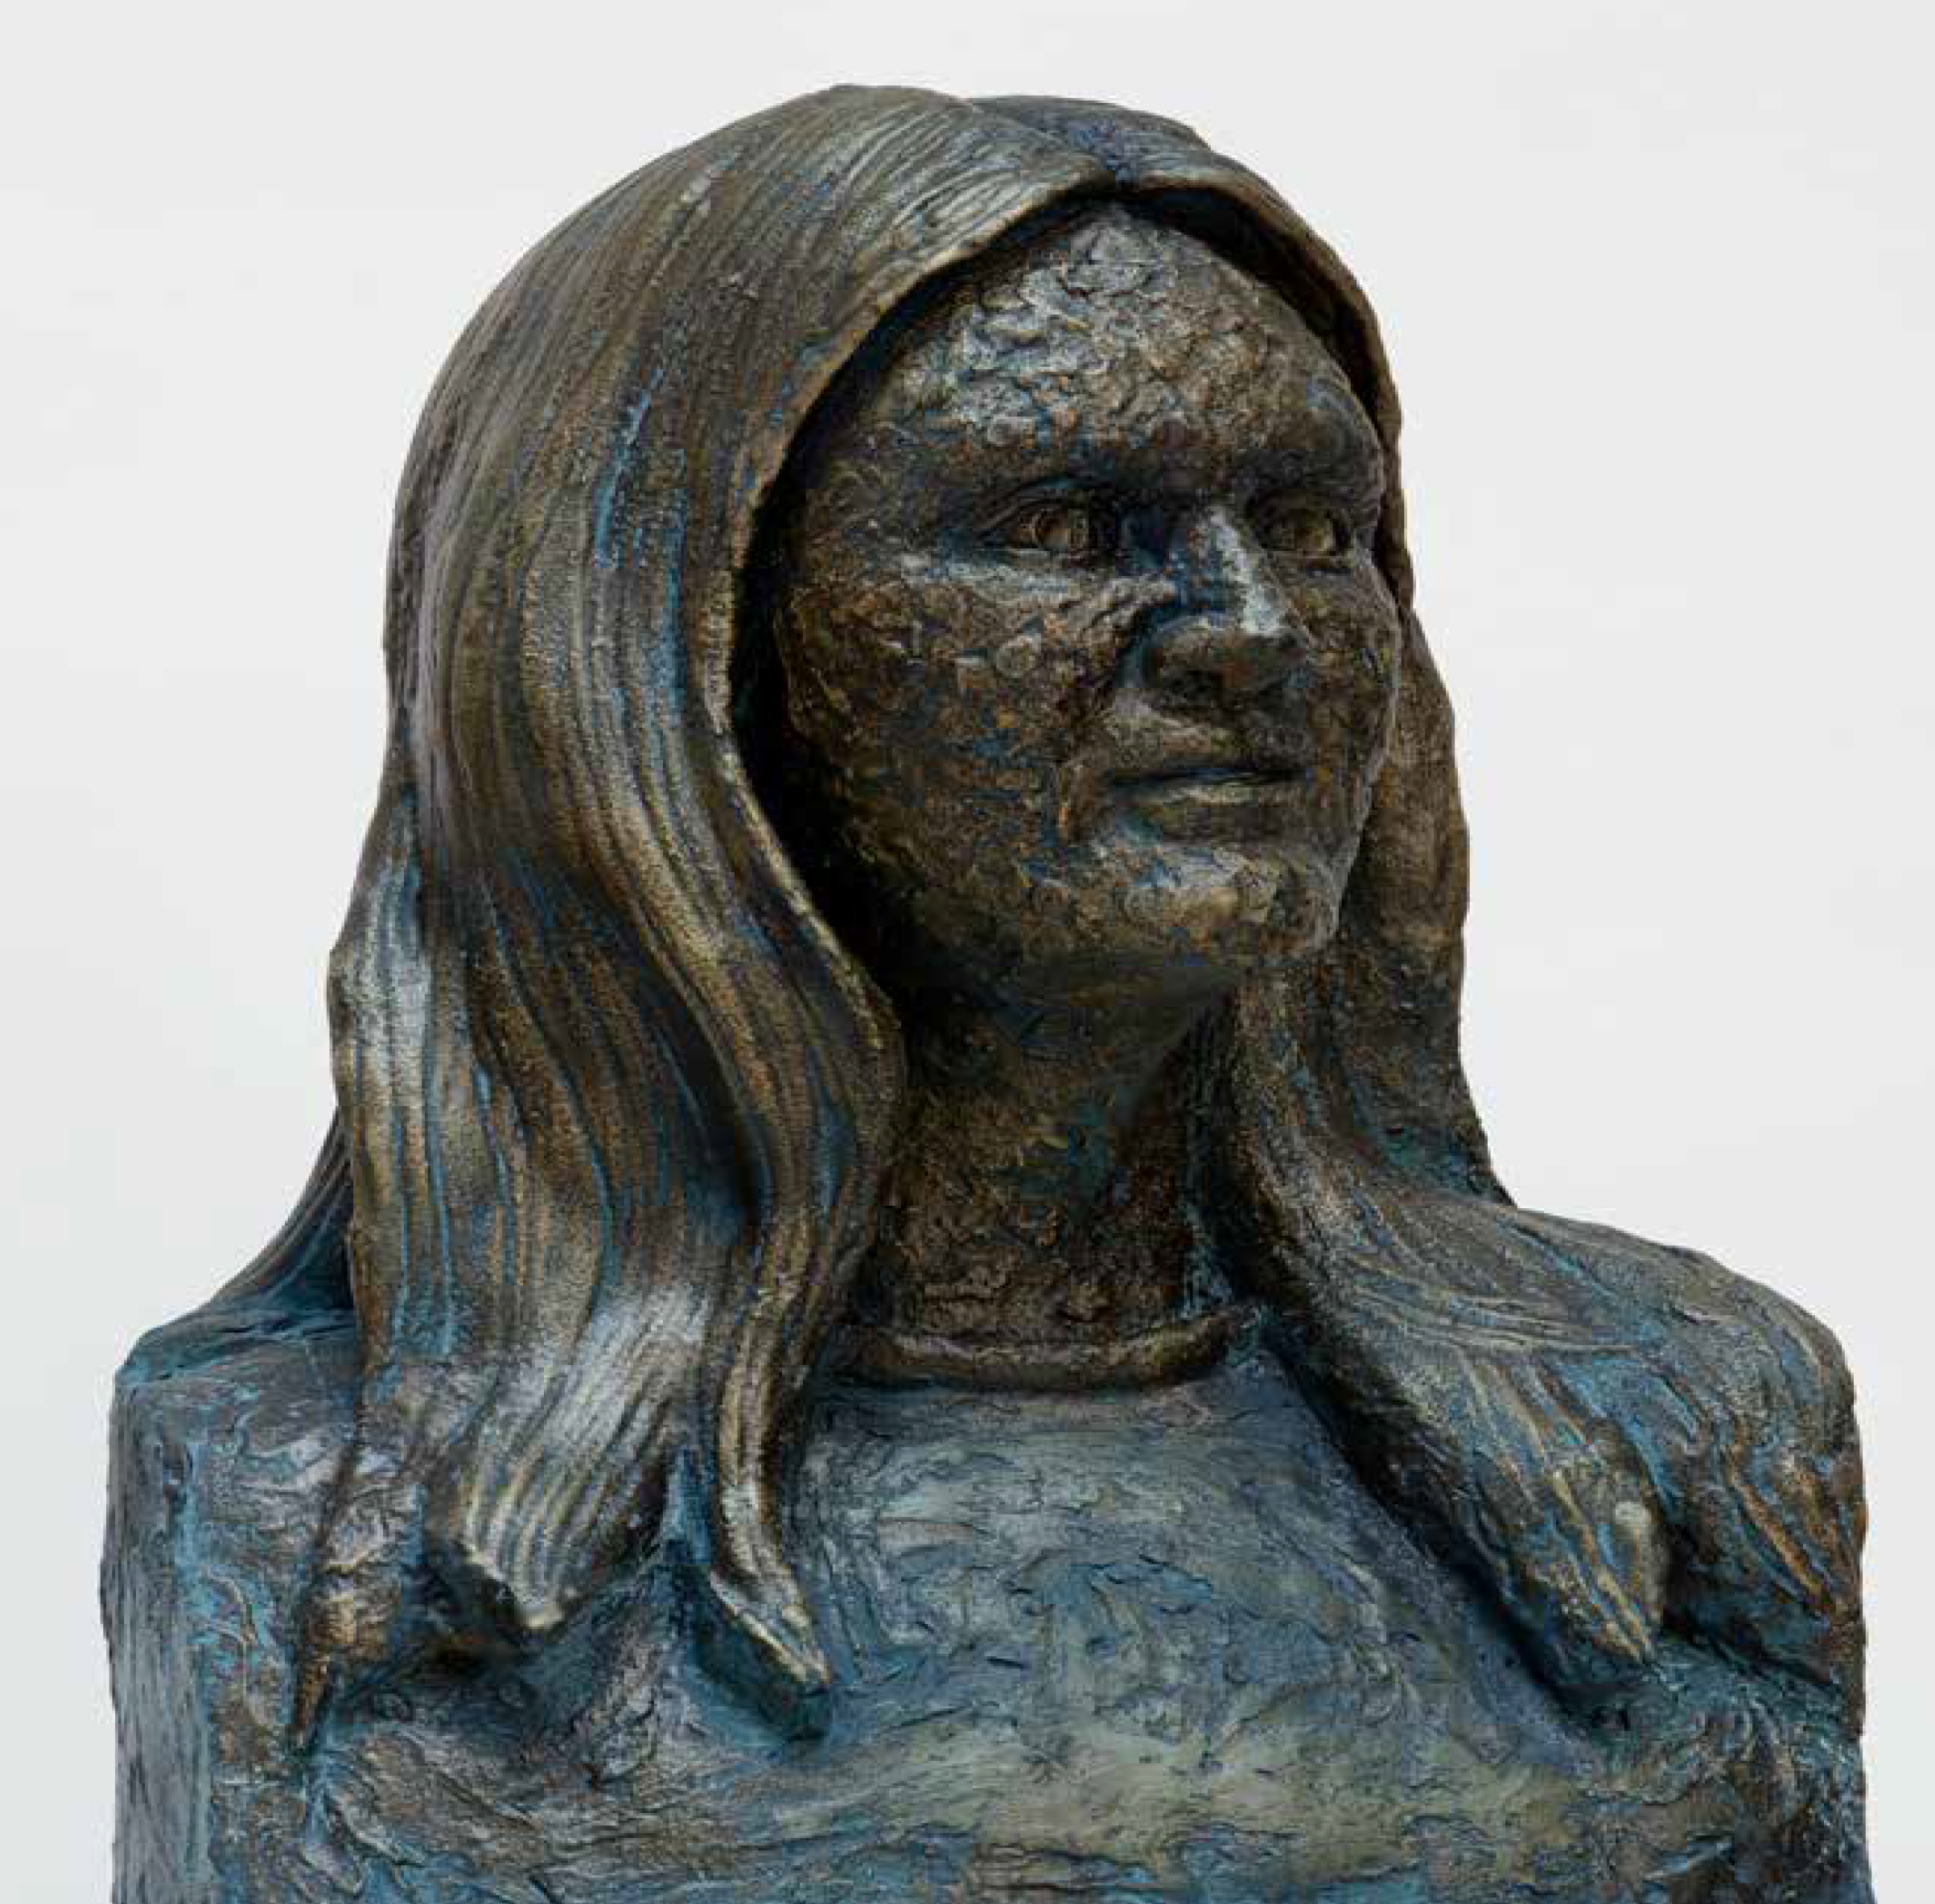 George Petrides' "Kore" (2022, bronze, 30" x 22") George Petrides' "Heroines of 1821" (2022, mixed media, 34" x 23") from Hellenic Heads